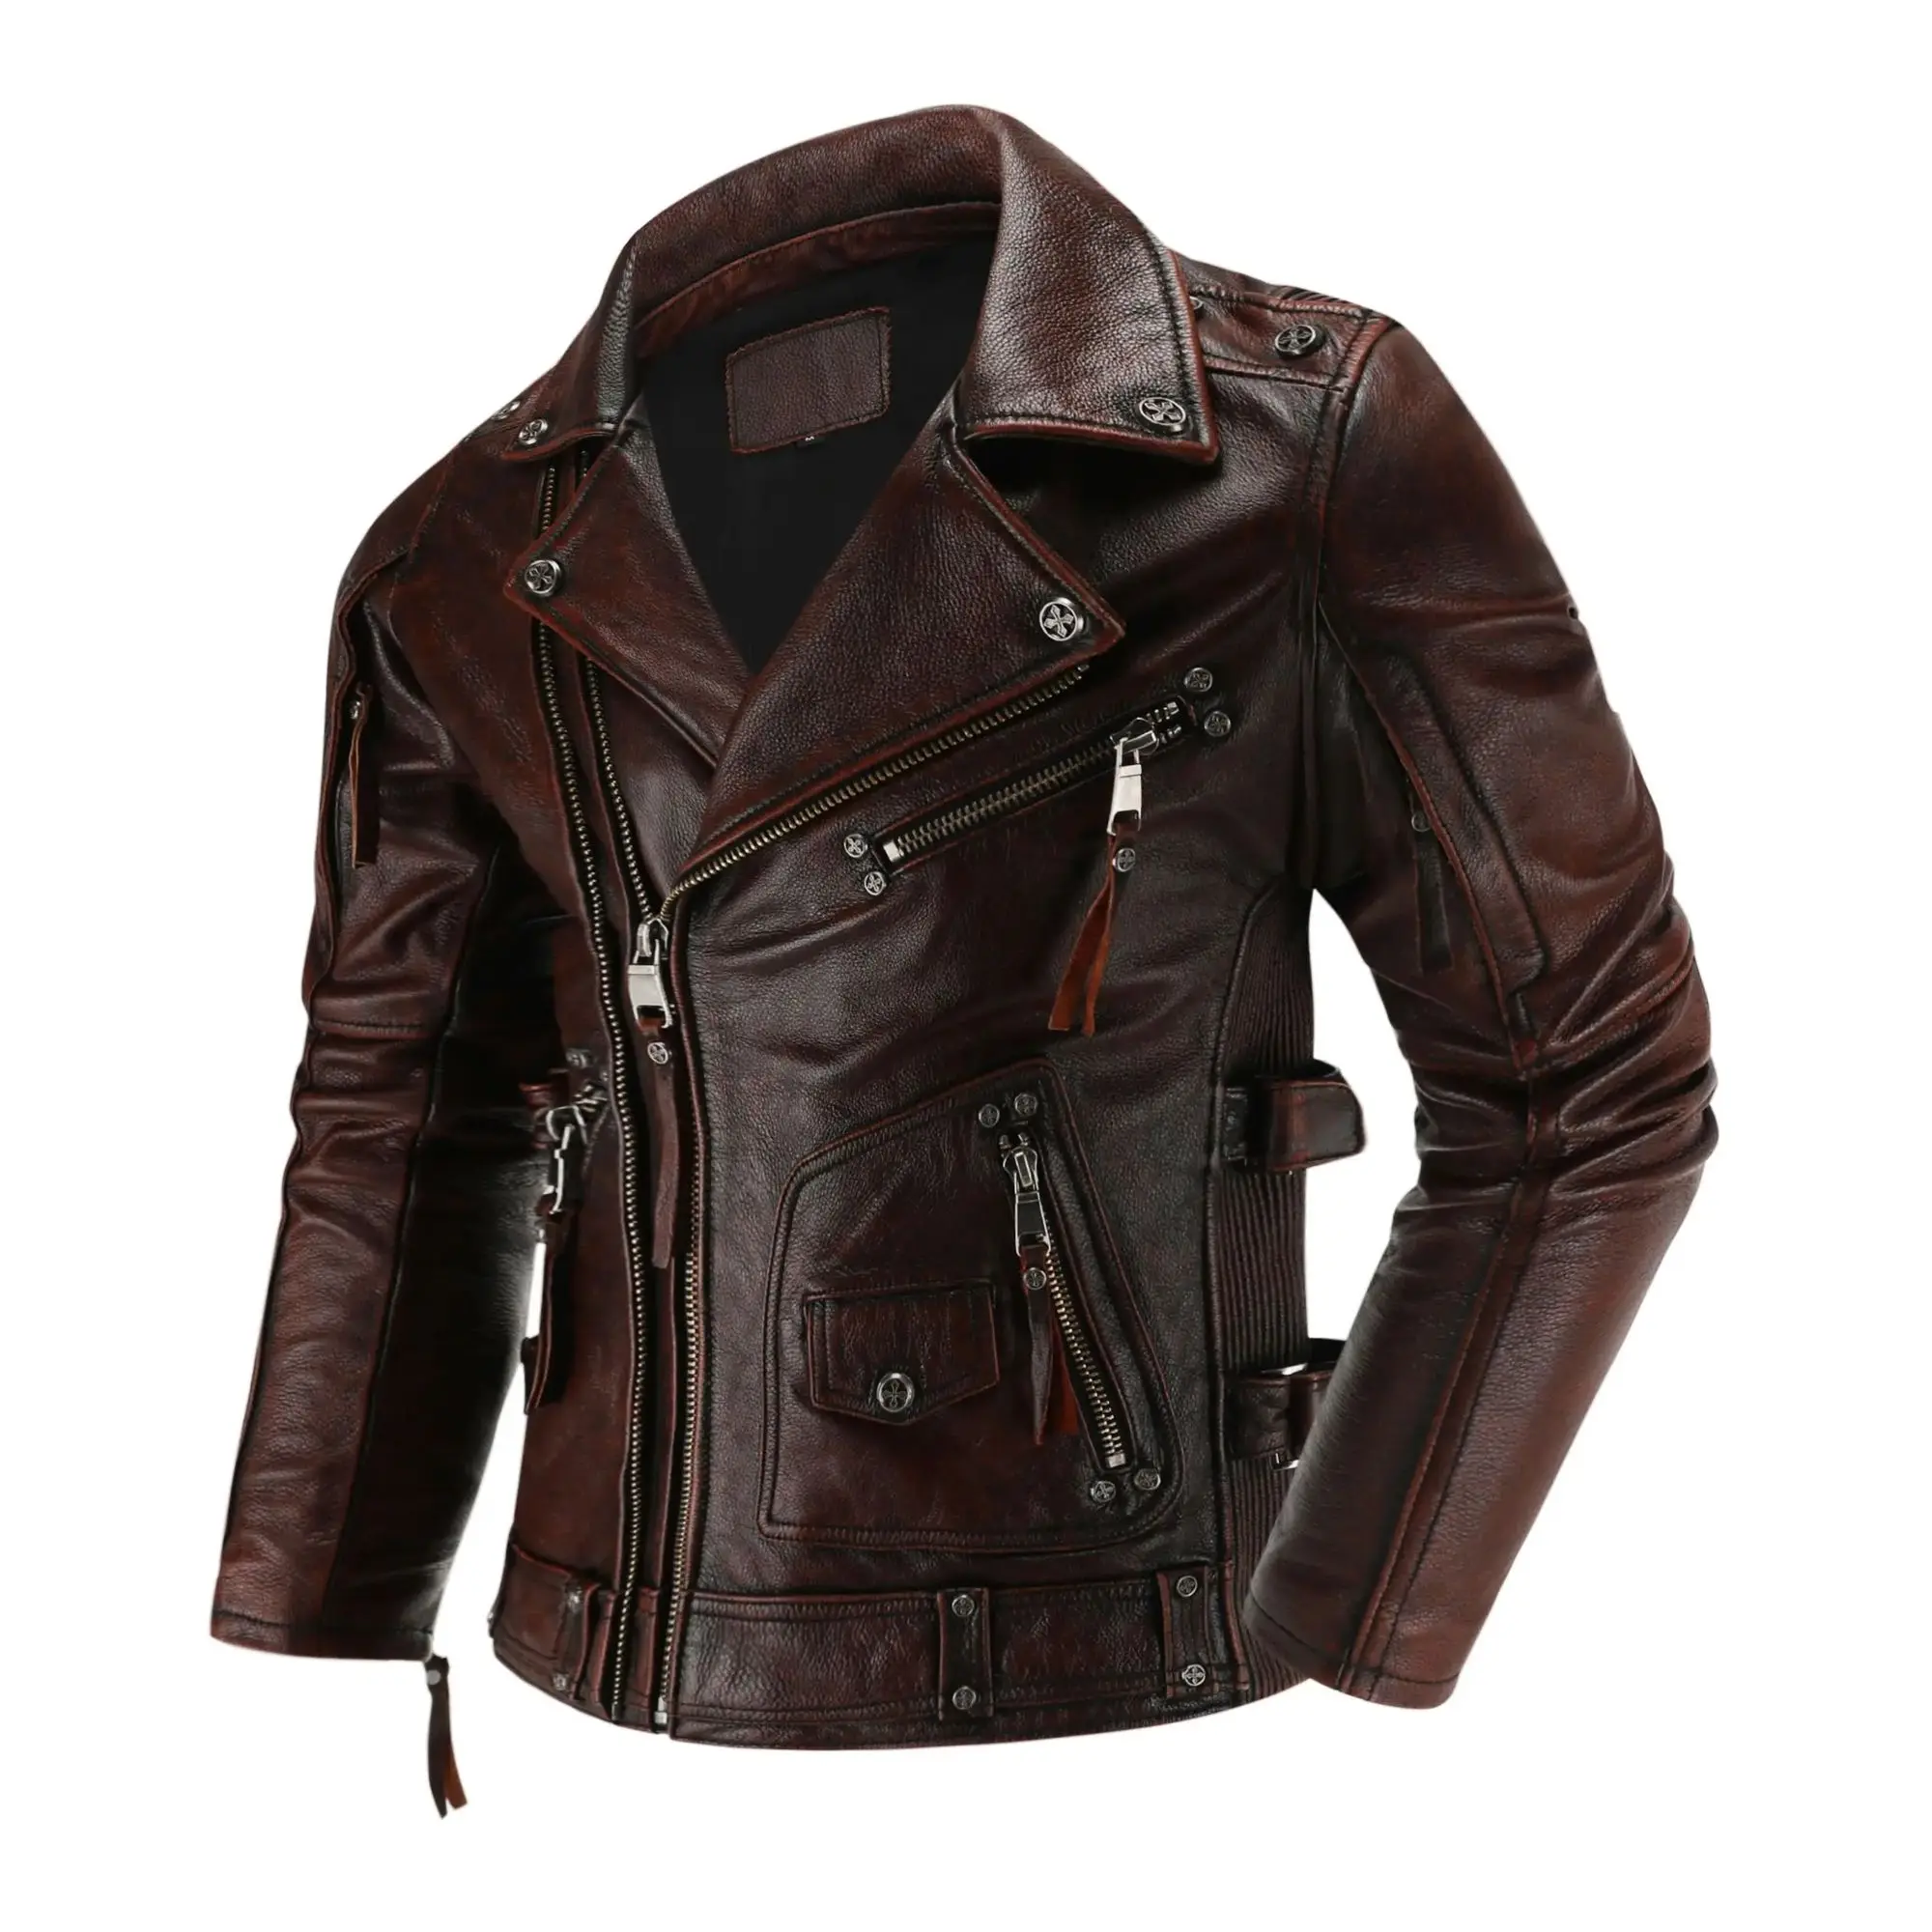 

Top Layer Cowhide Genuine Leather Jacket Men's Graphite Distressed Multi Zipper High Quality Lapel Motorcycle